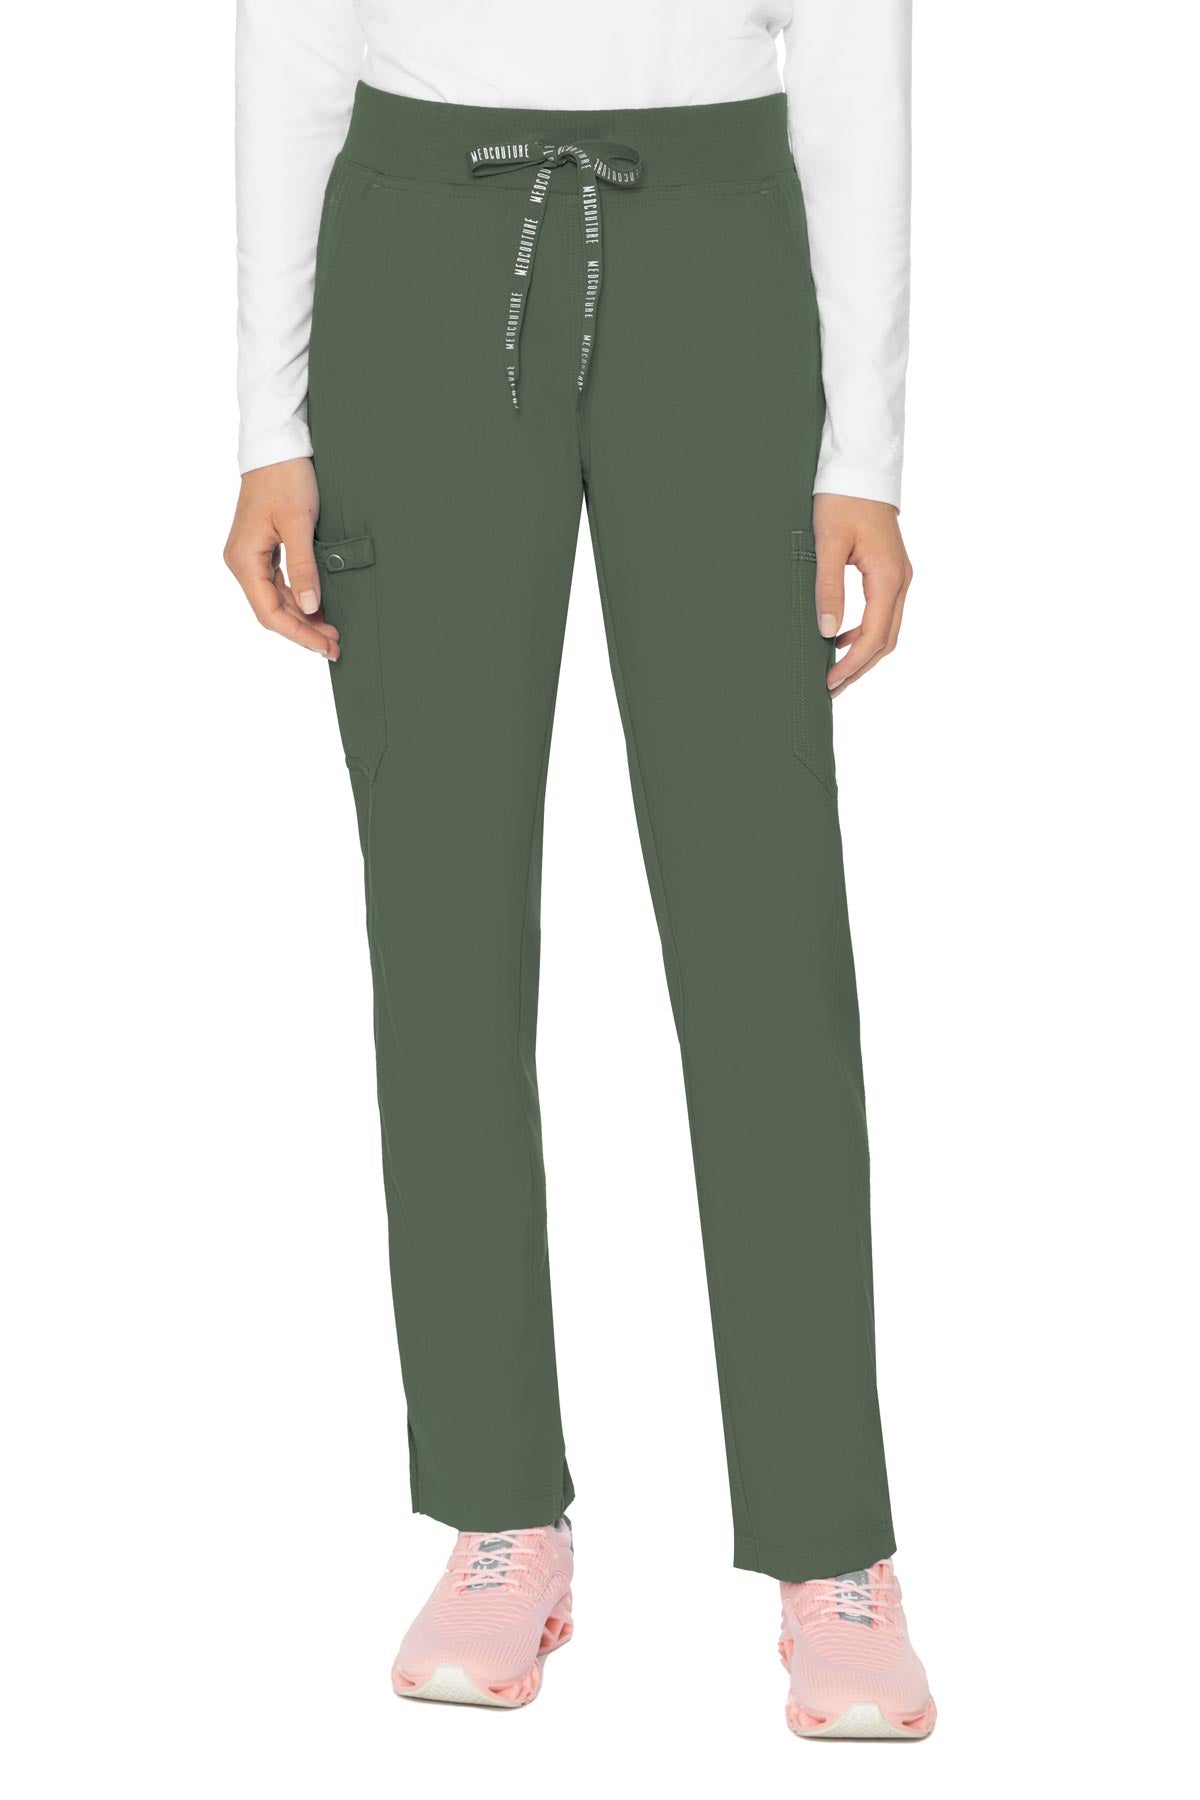 7725P Petite Med Couture Touch Yoga Waist Cargo Pants 